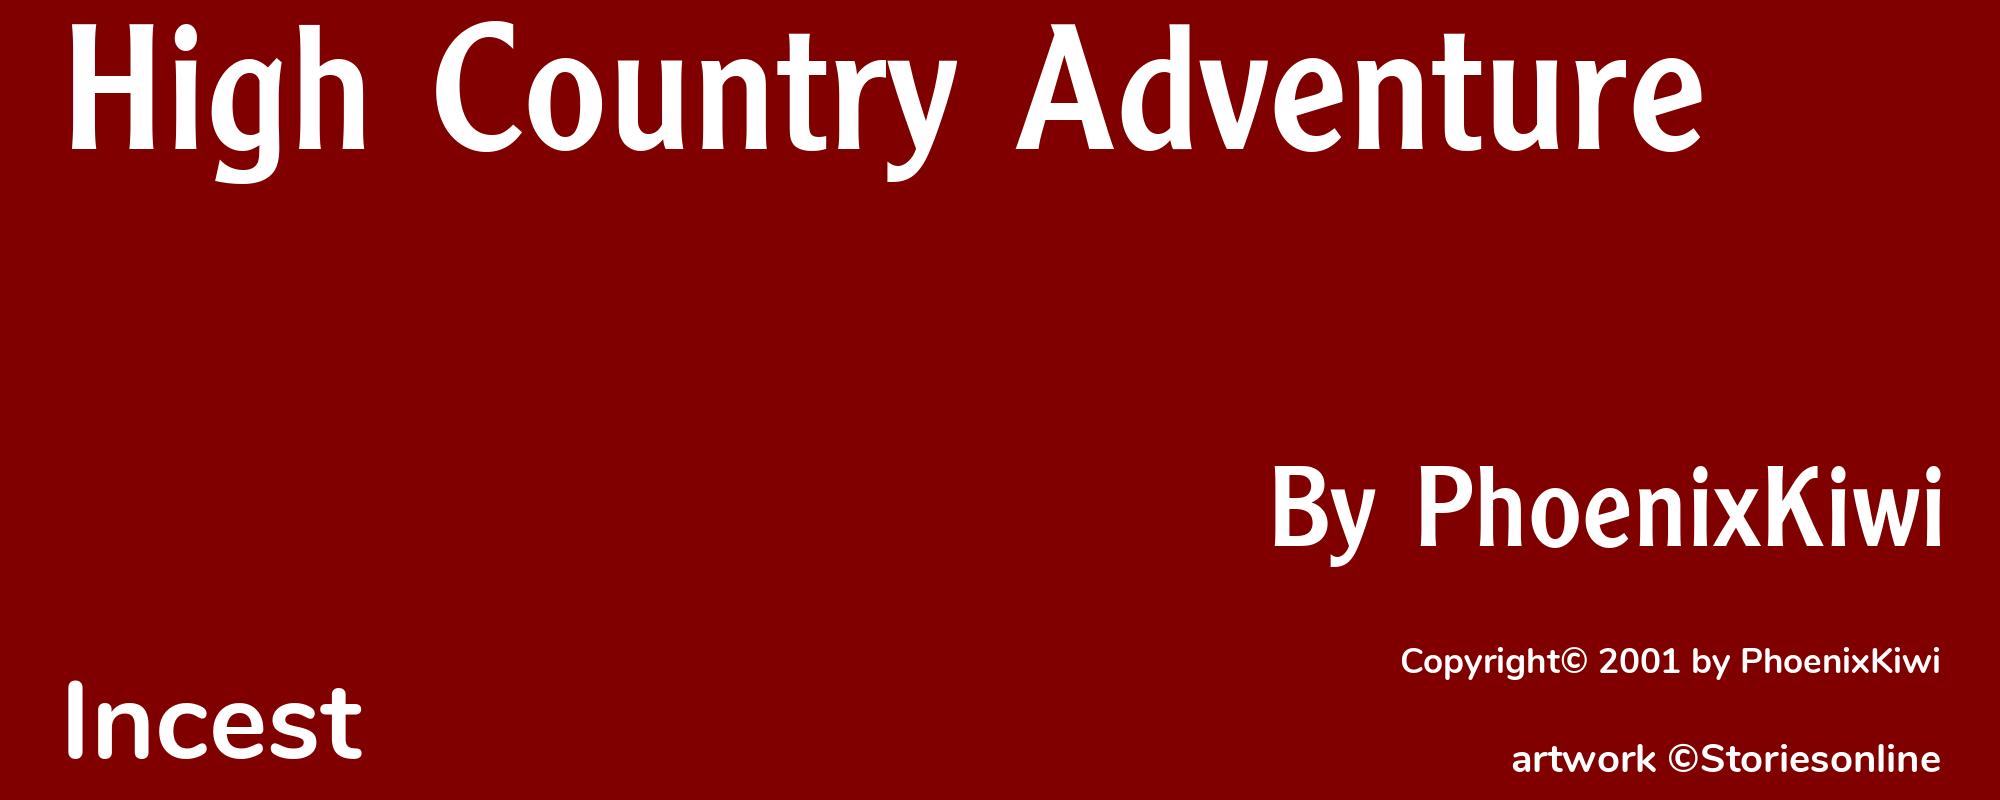 High Country Adventure - Cover